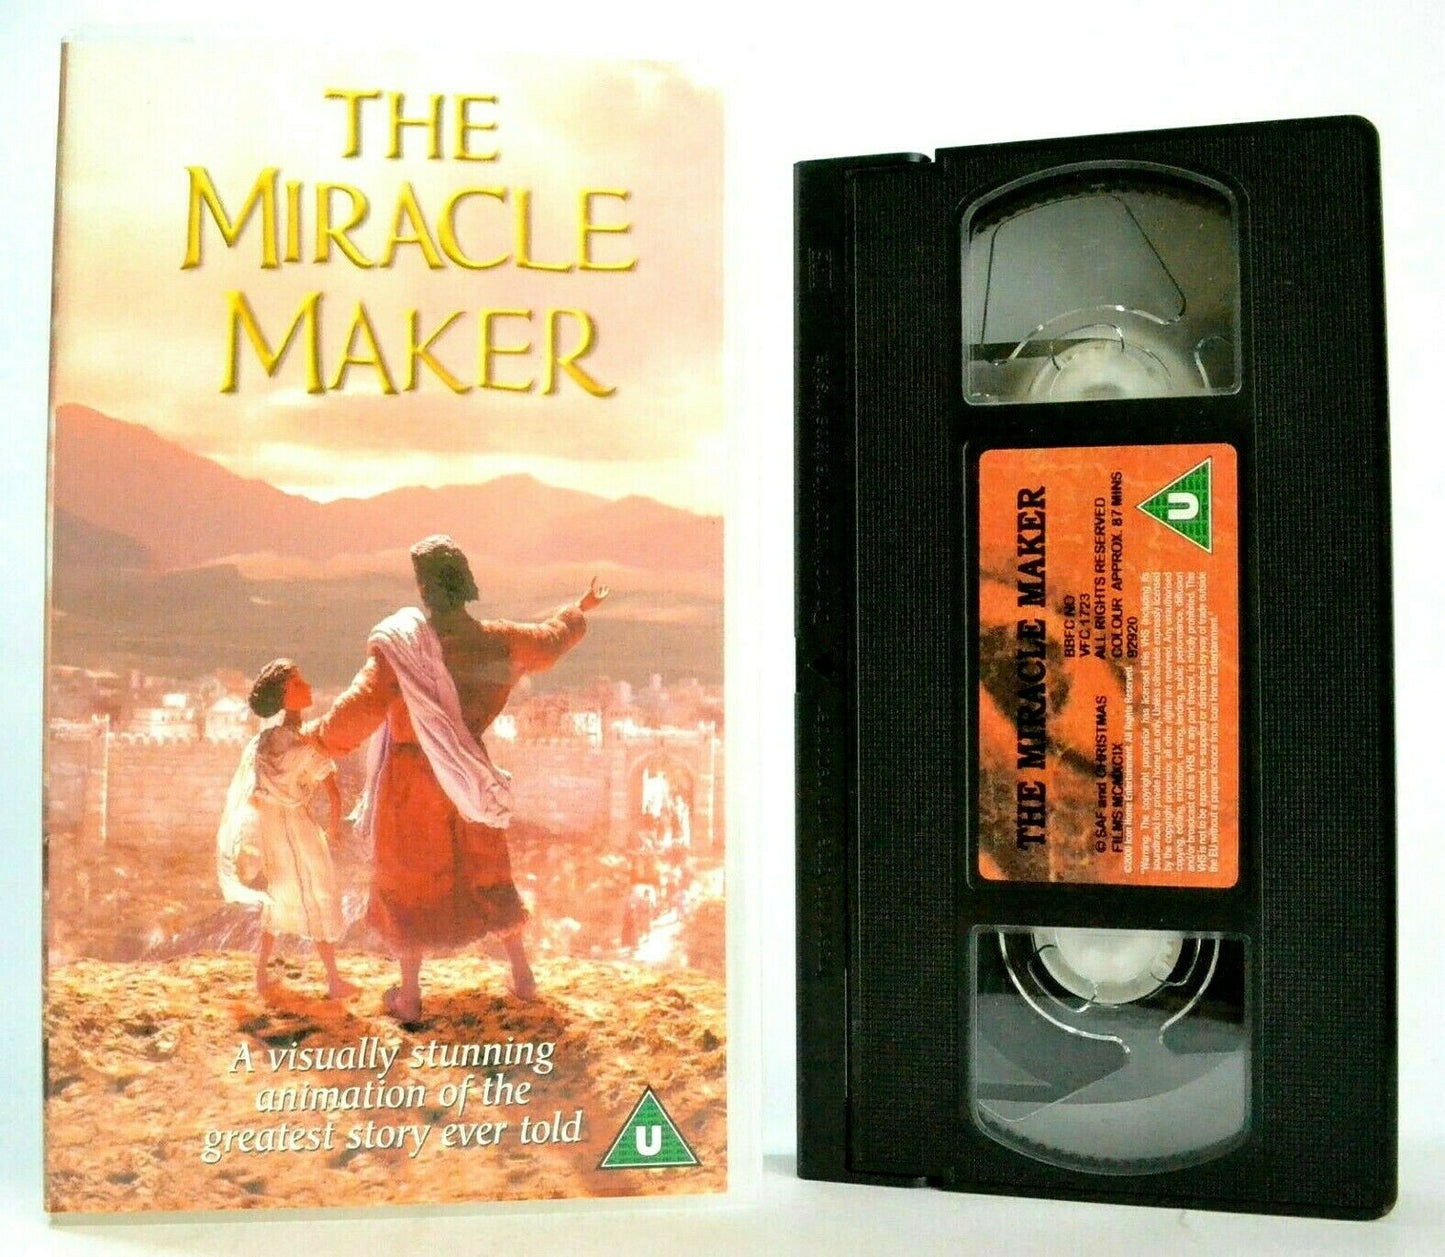 The Miracle Maker: 3D Model Animation - Life Of Jesus - Ralph Fiennes - Pal VHS-